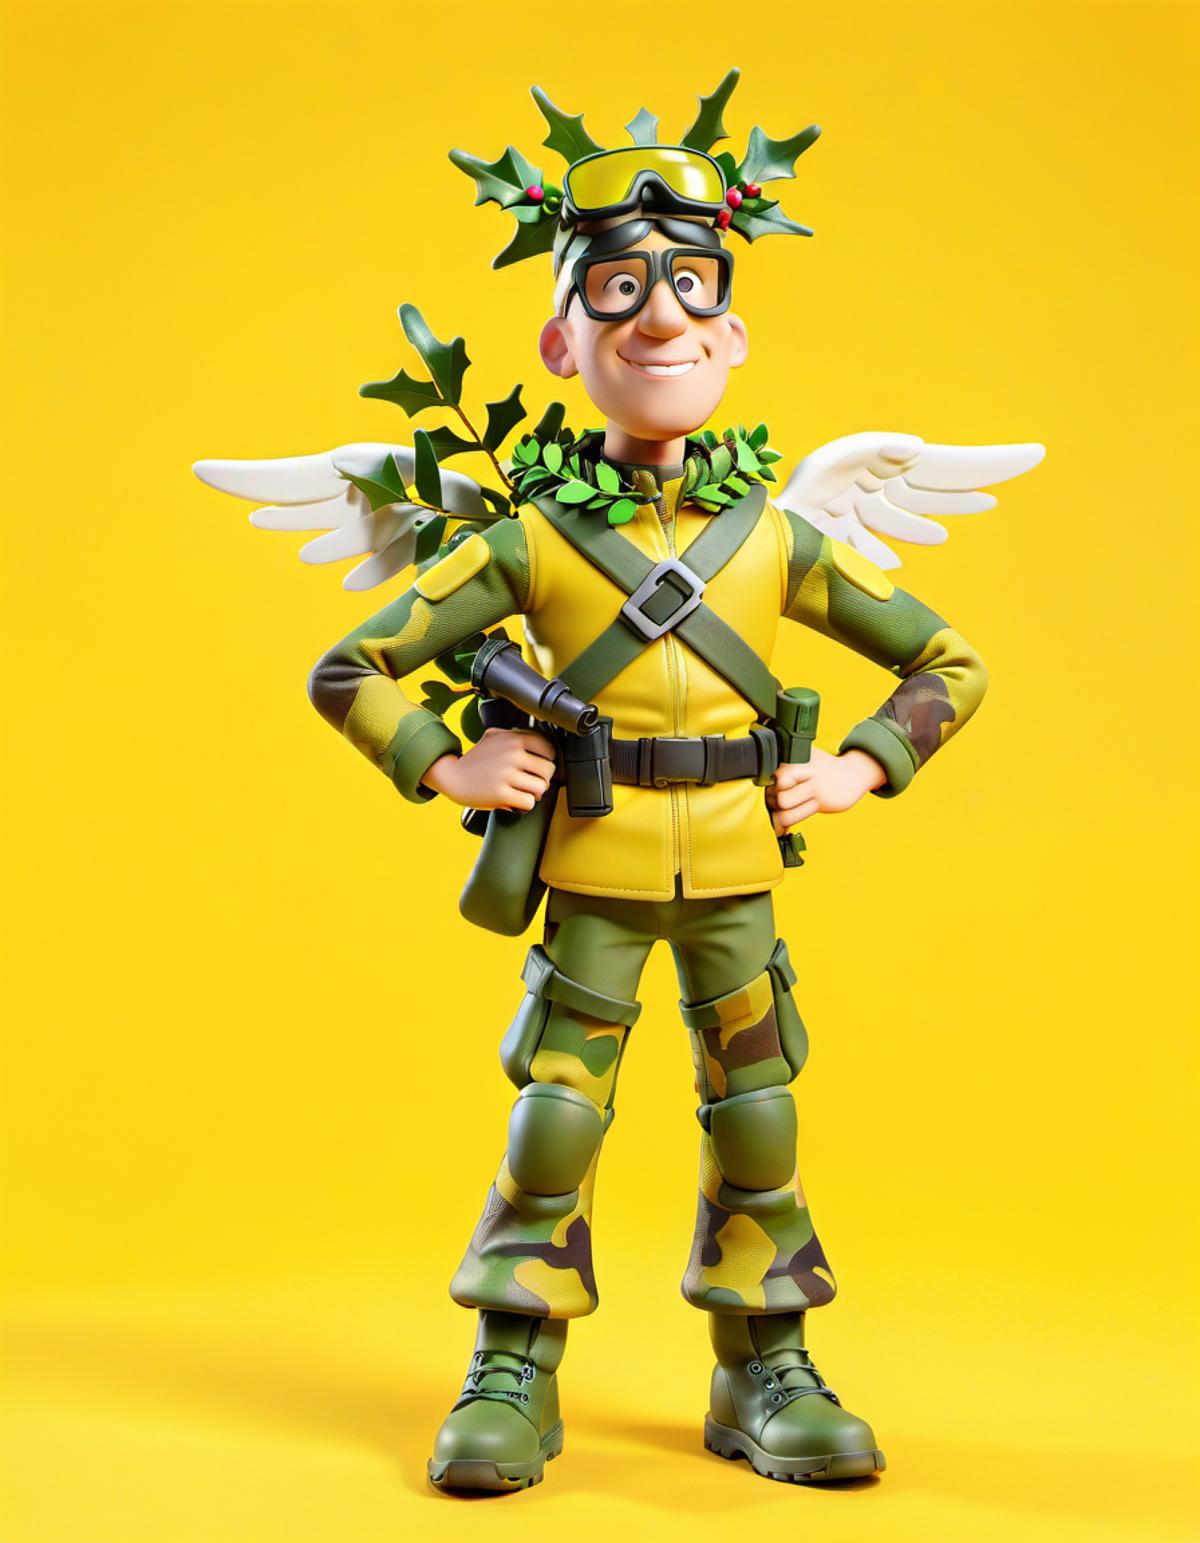 Cartoon character figurine wearing a camo outfit and holding a gun.